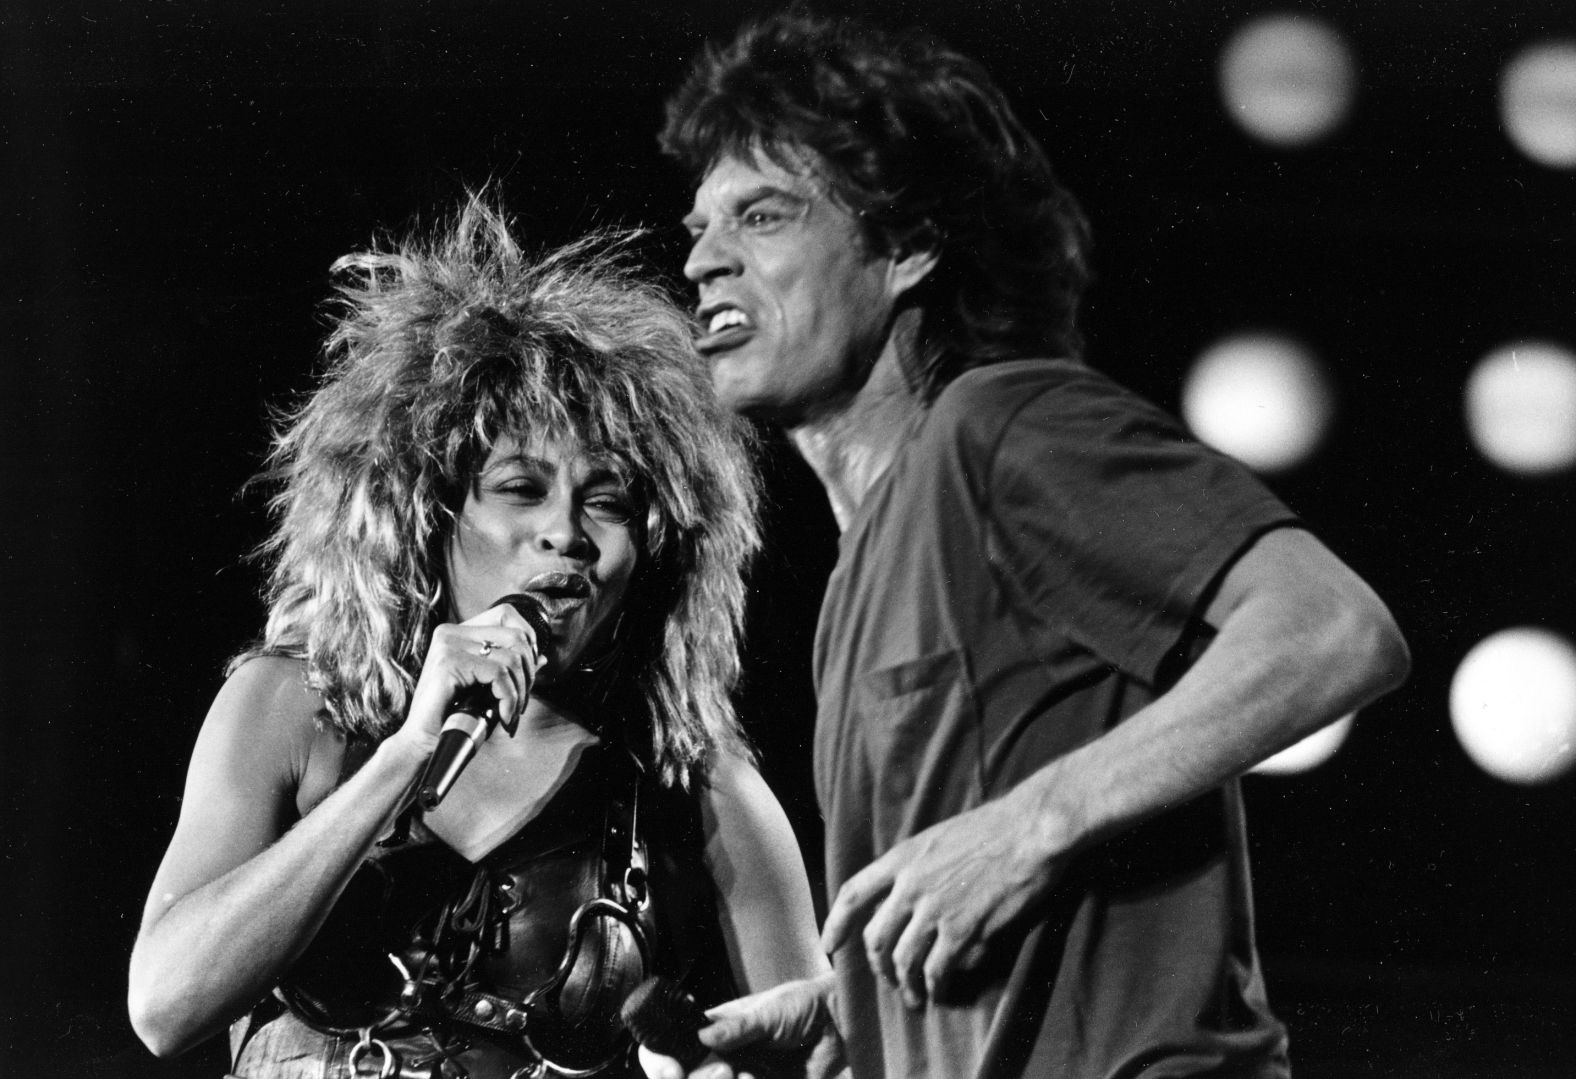 Turner performs with Mick Jagger at the Live Aid concert in Philadelphia in 1985.